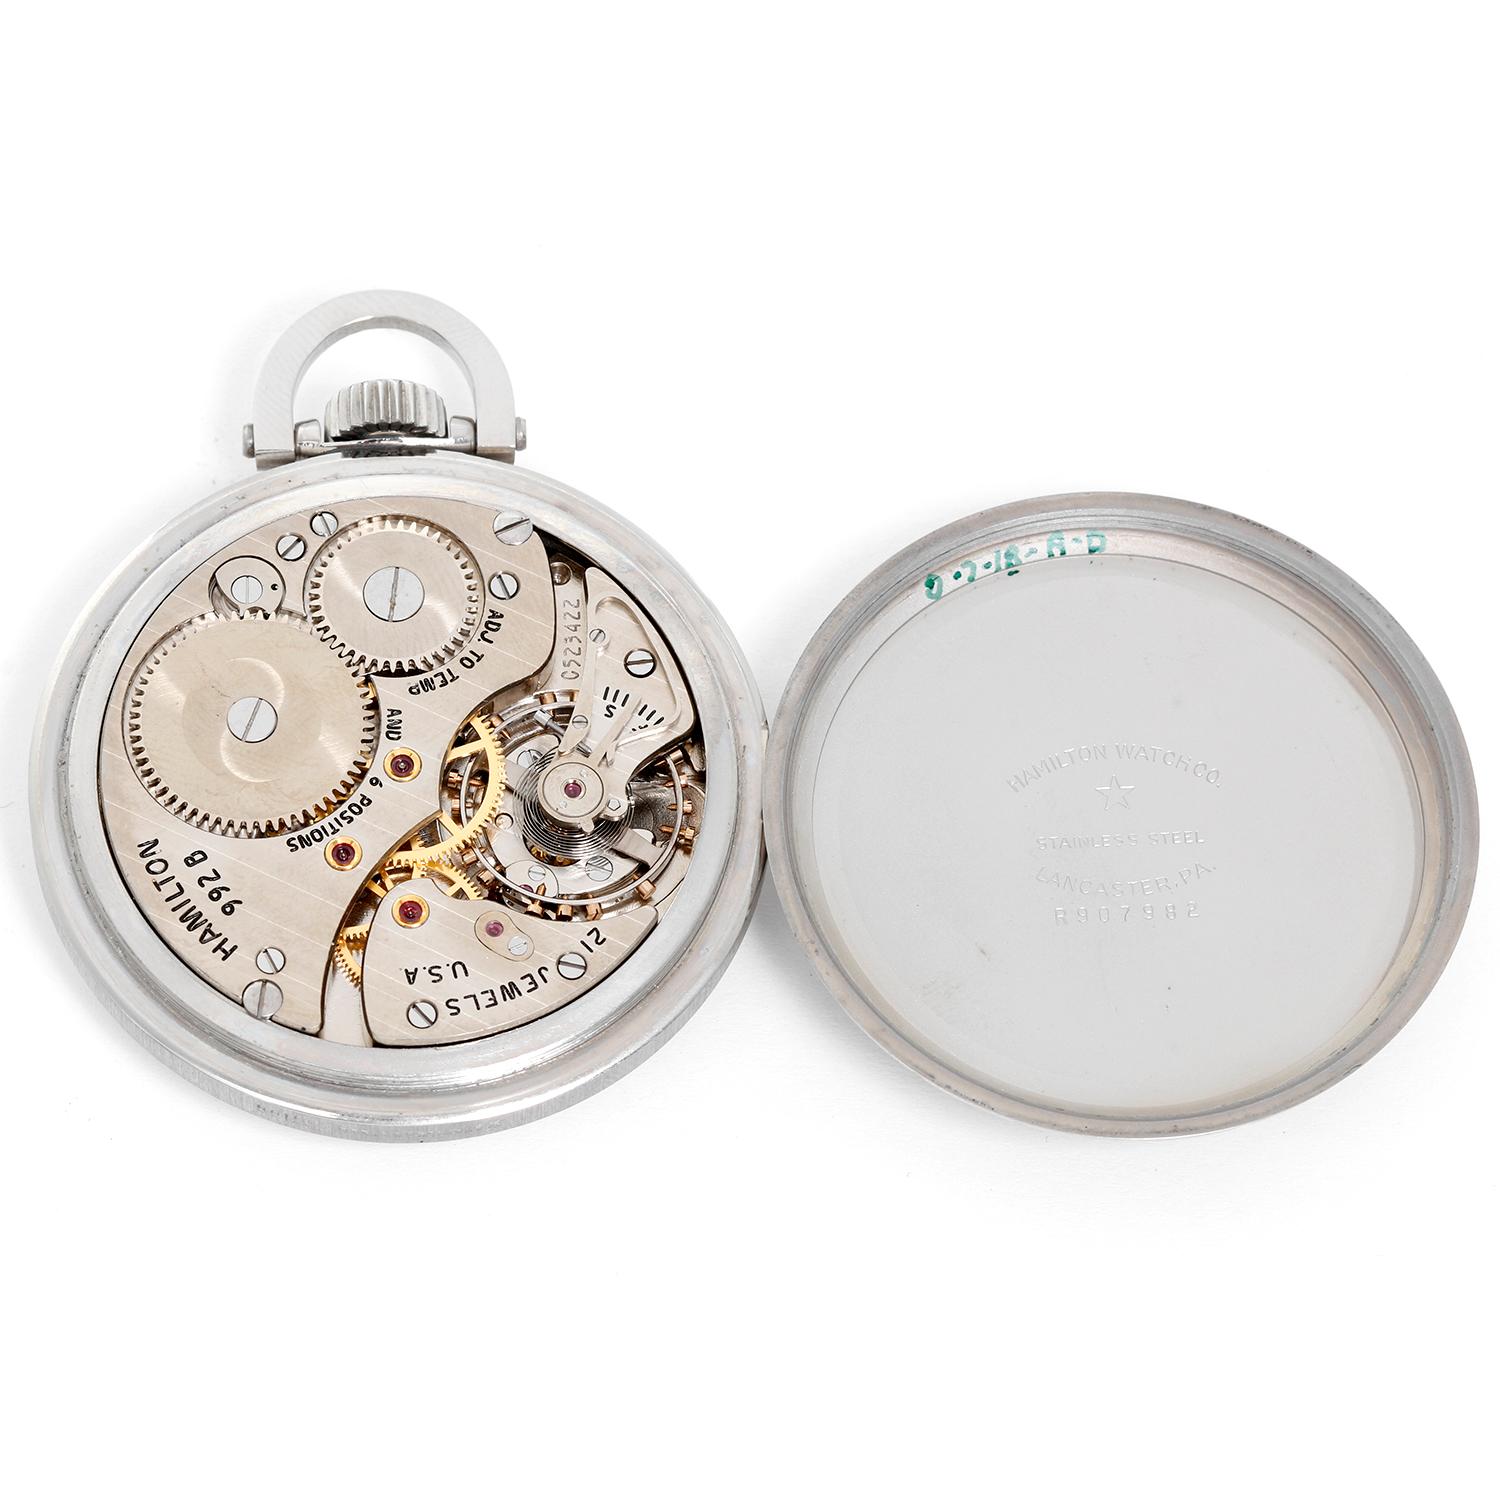 Hamilton Stainless Steel Railway Special Pocket Watch - Manual winding; 21 jewels. Stainless steel case (50mm). White enamel Hamilton double sunk Montgomery dial, features ornate black Arabic hour numerals and block minute numerals. The dial is